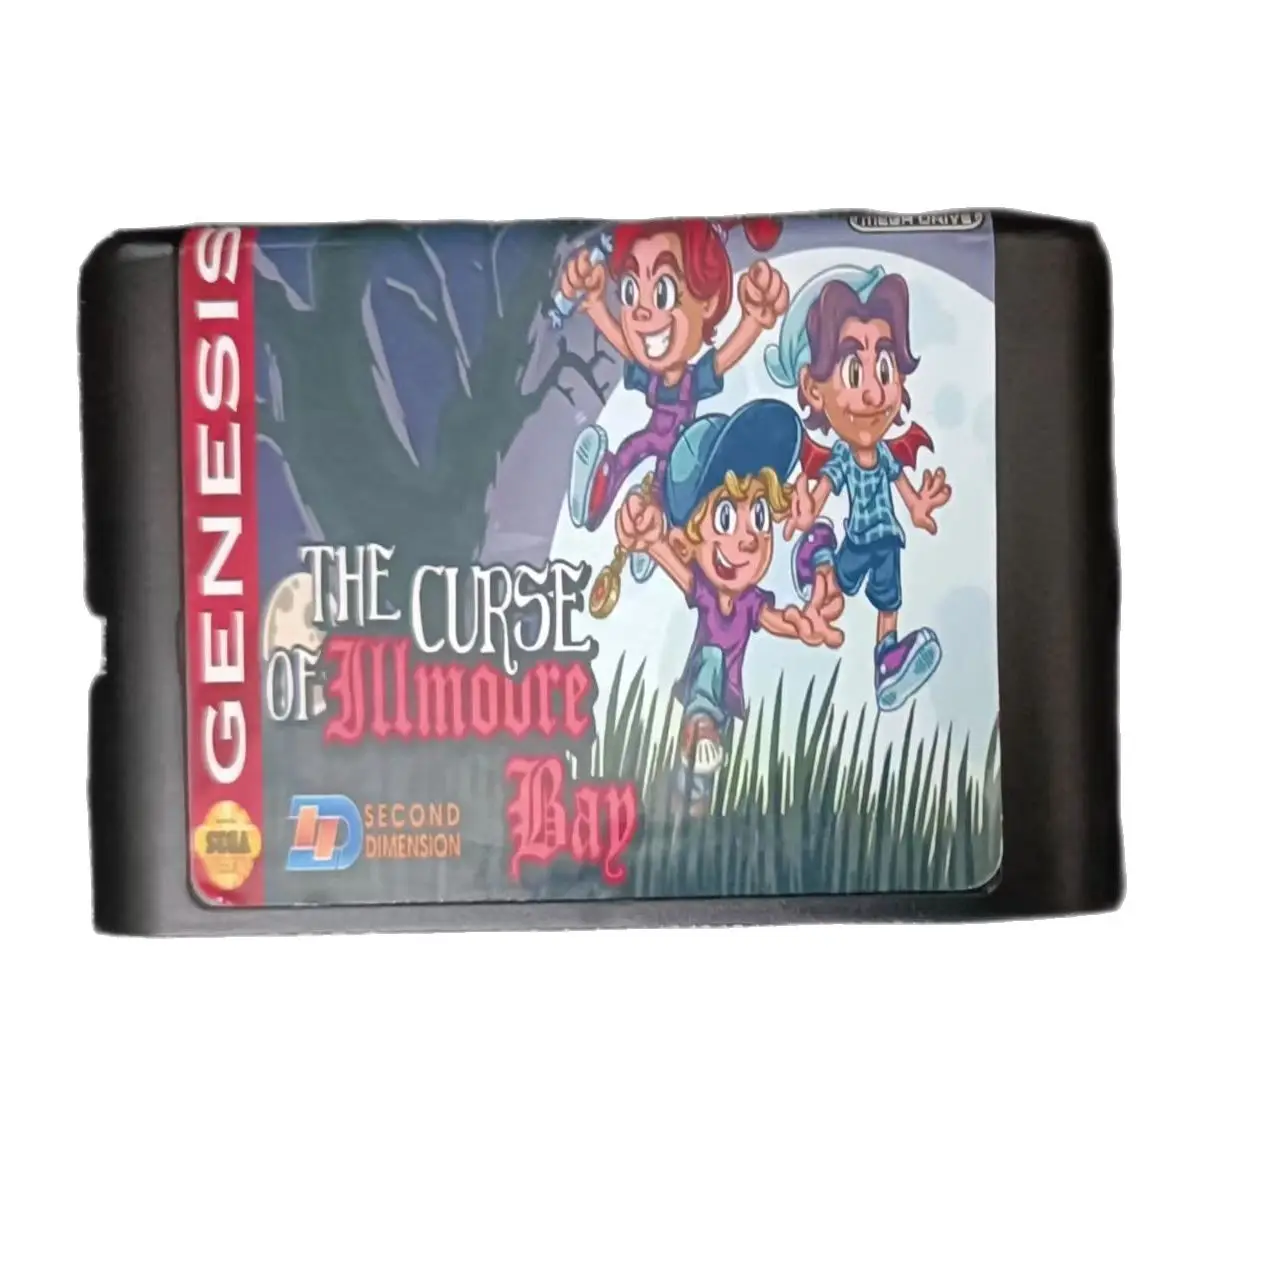 

MD The Curse of Illmoore Bay Retro Mega Drive Game Card 16BIT Genesis Game card Full version does not suport save